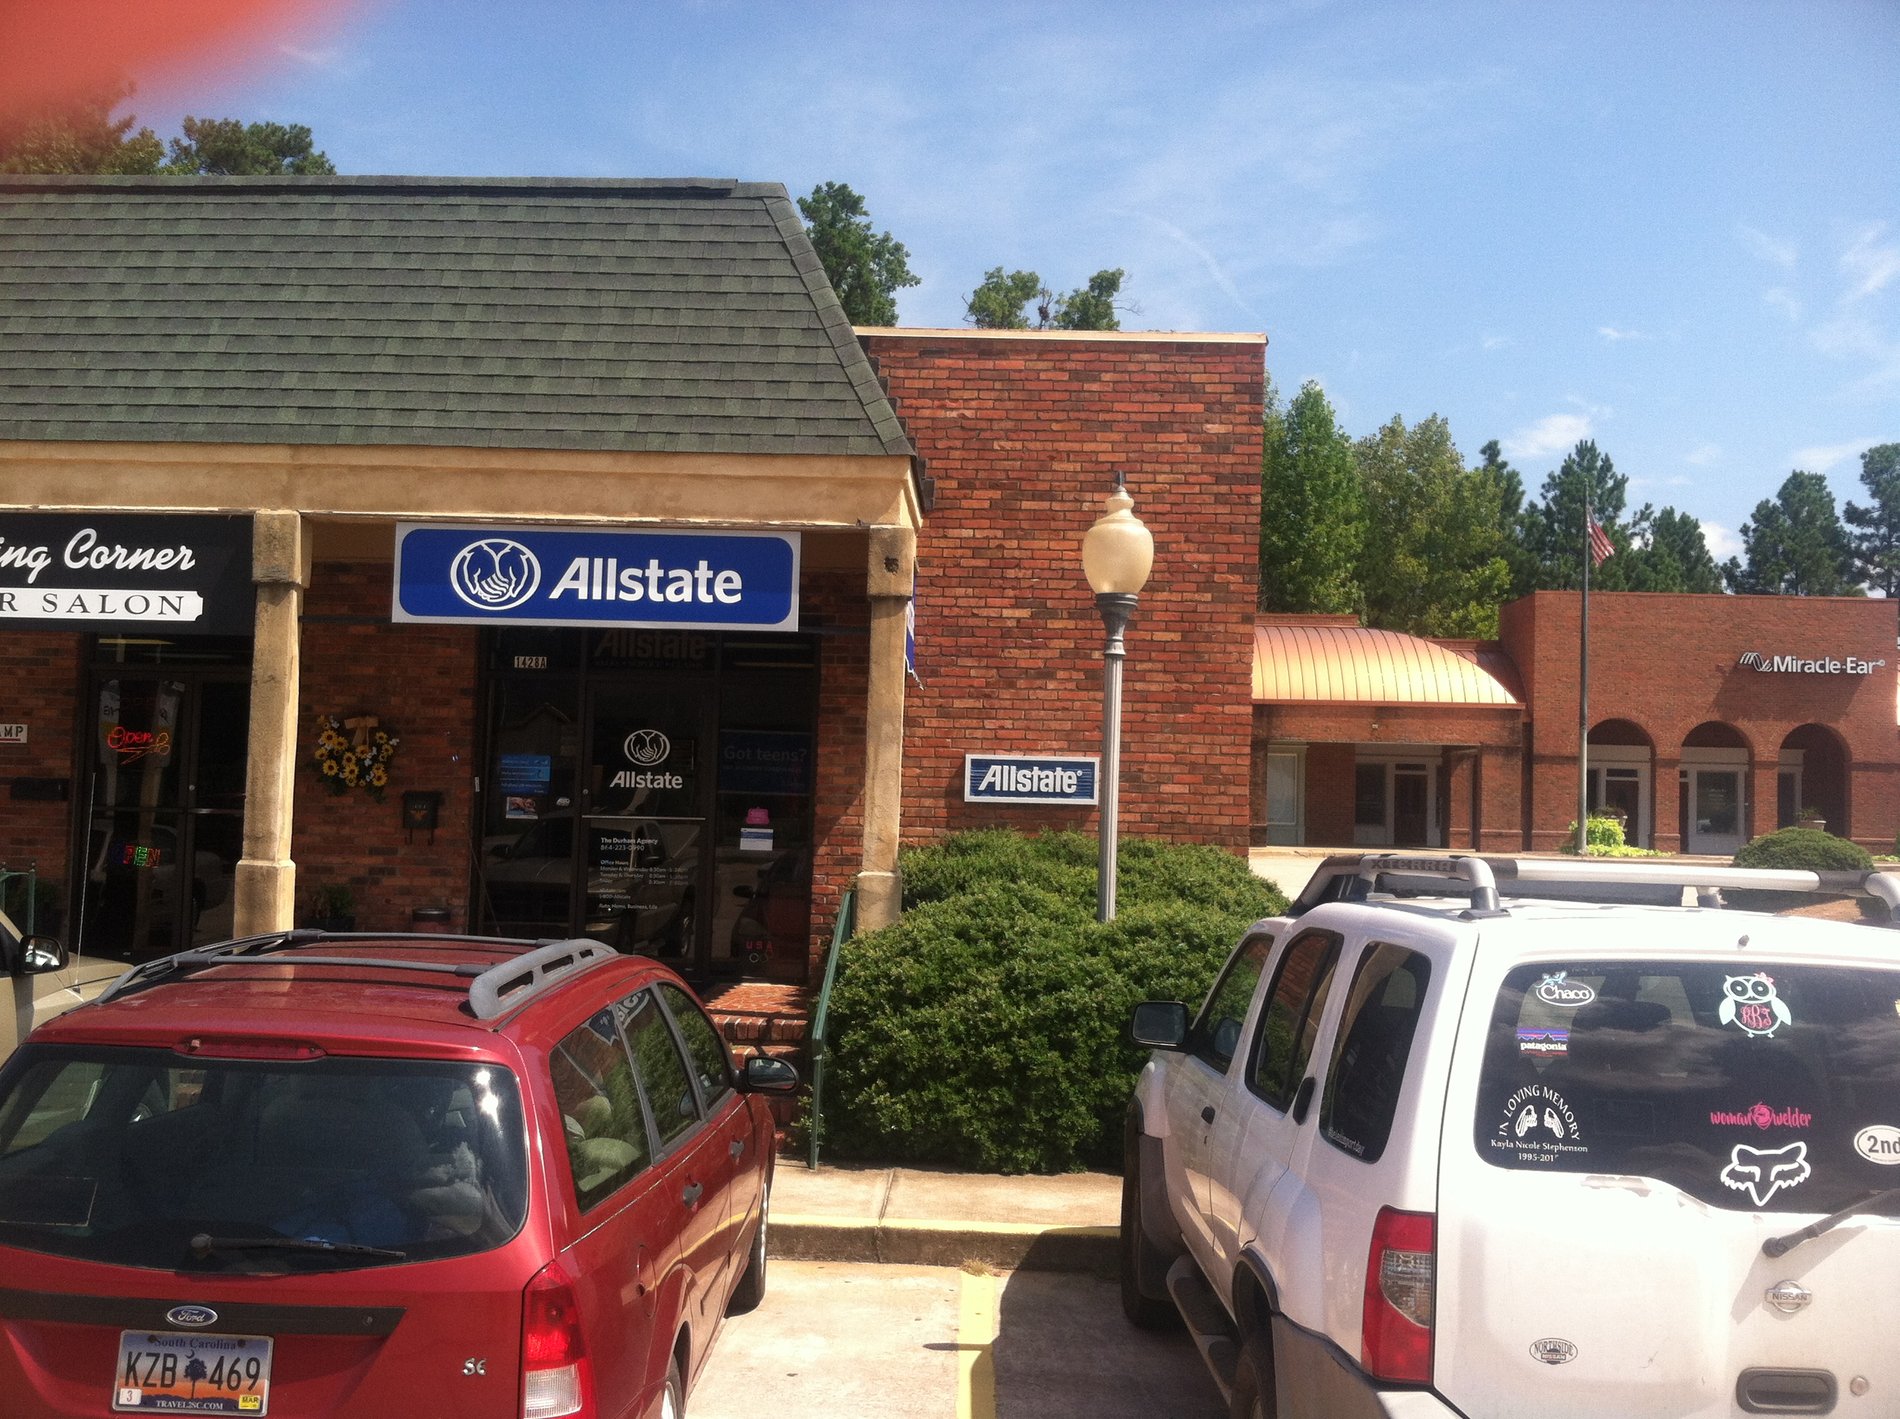 Allstate Car Insurance in Greenwood, SC Andy Durham